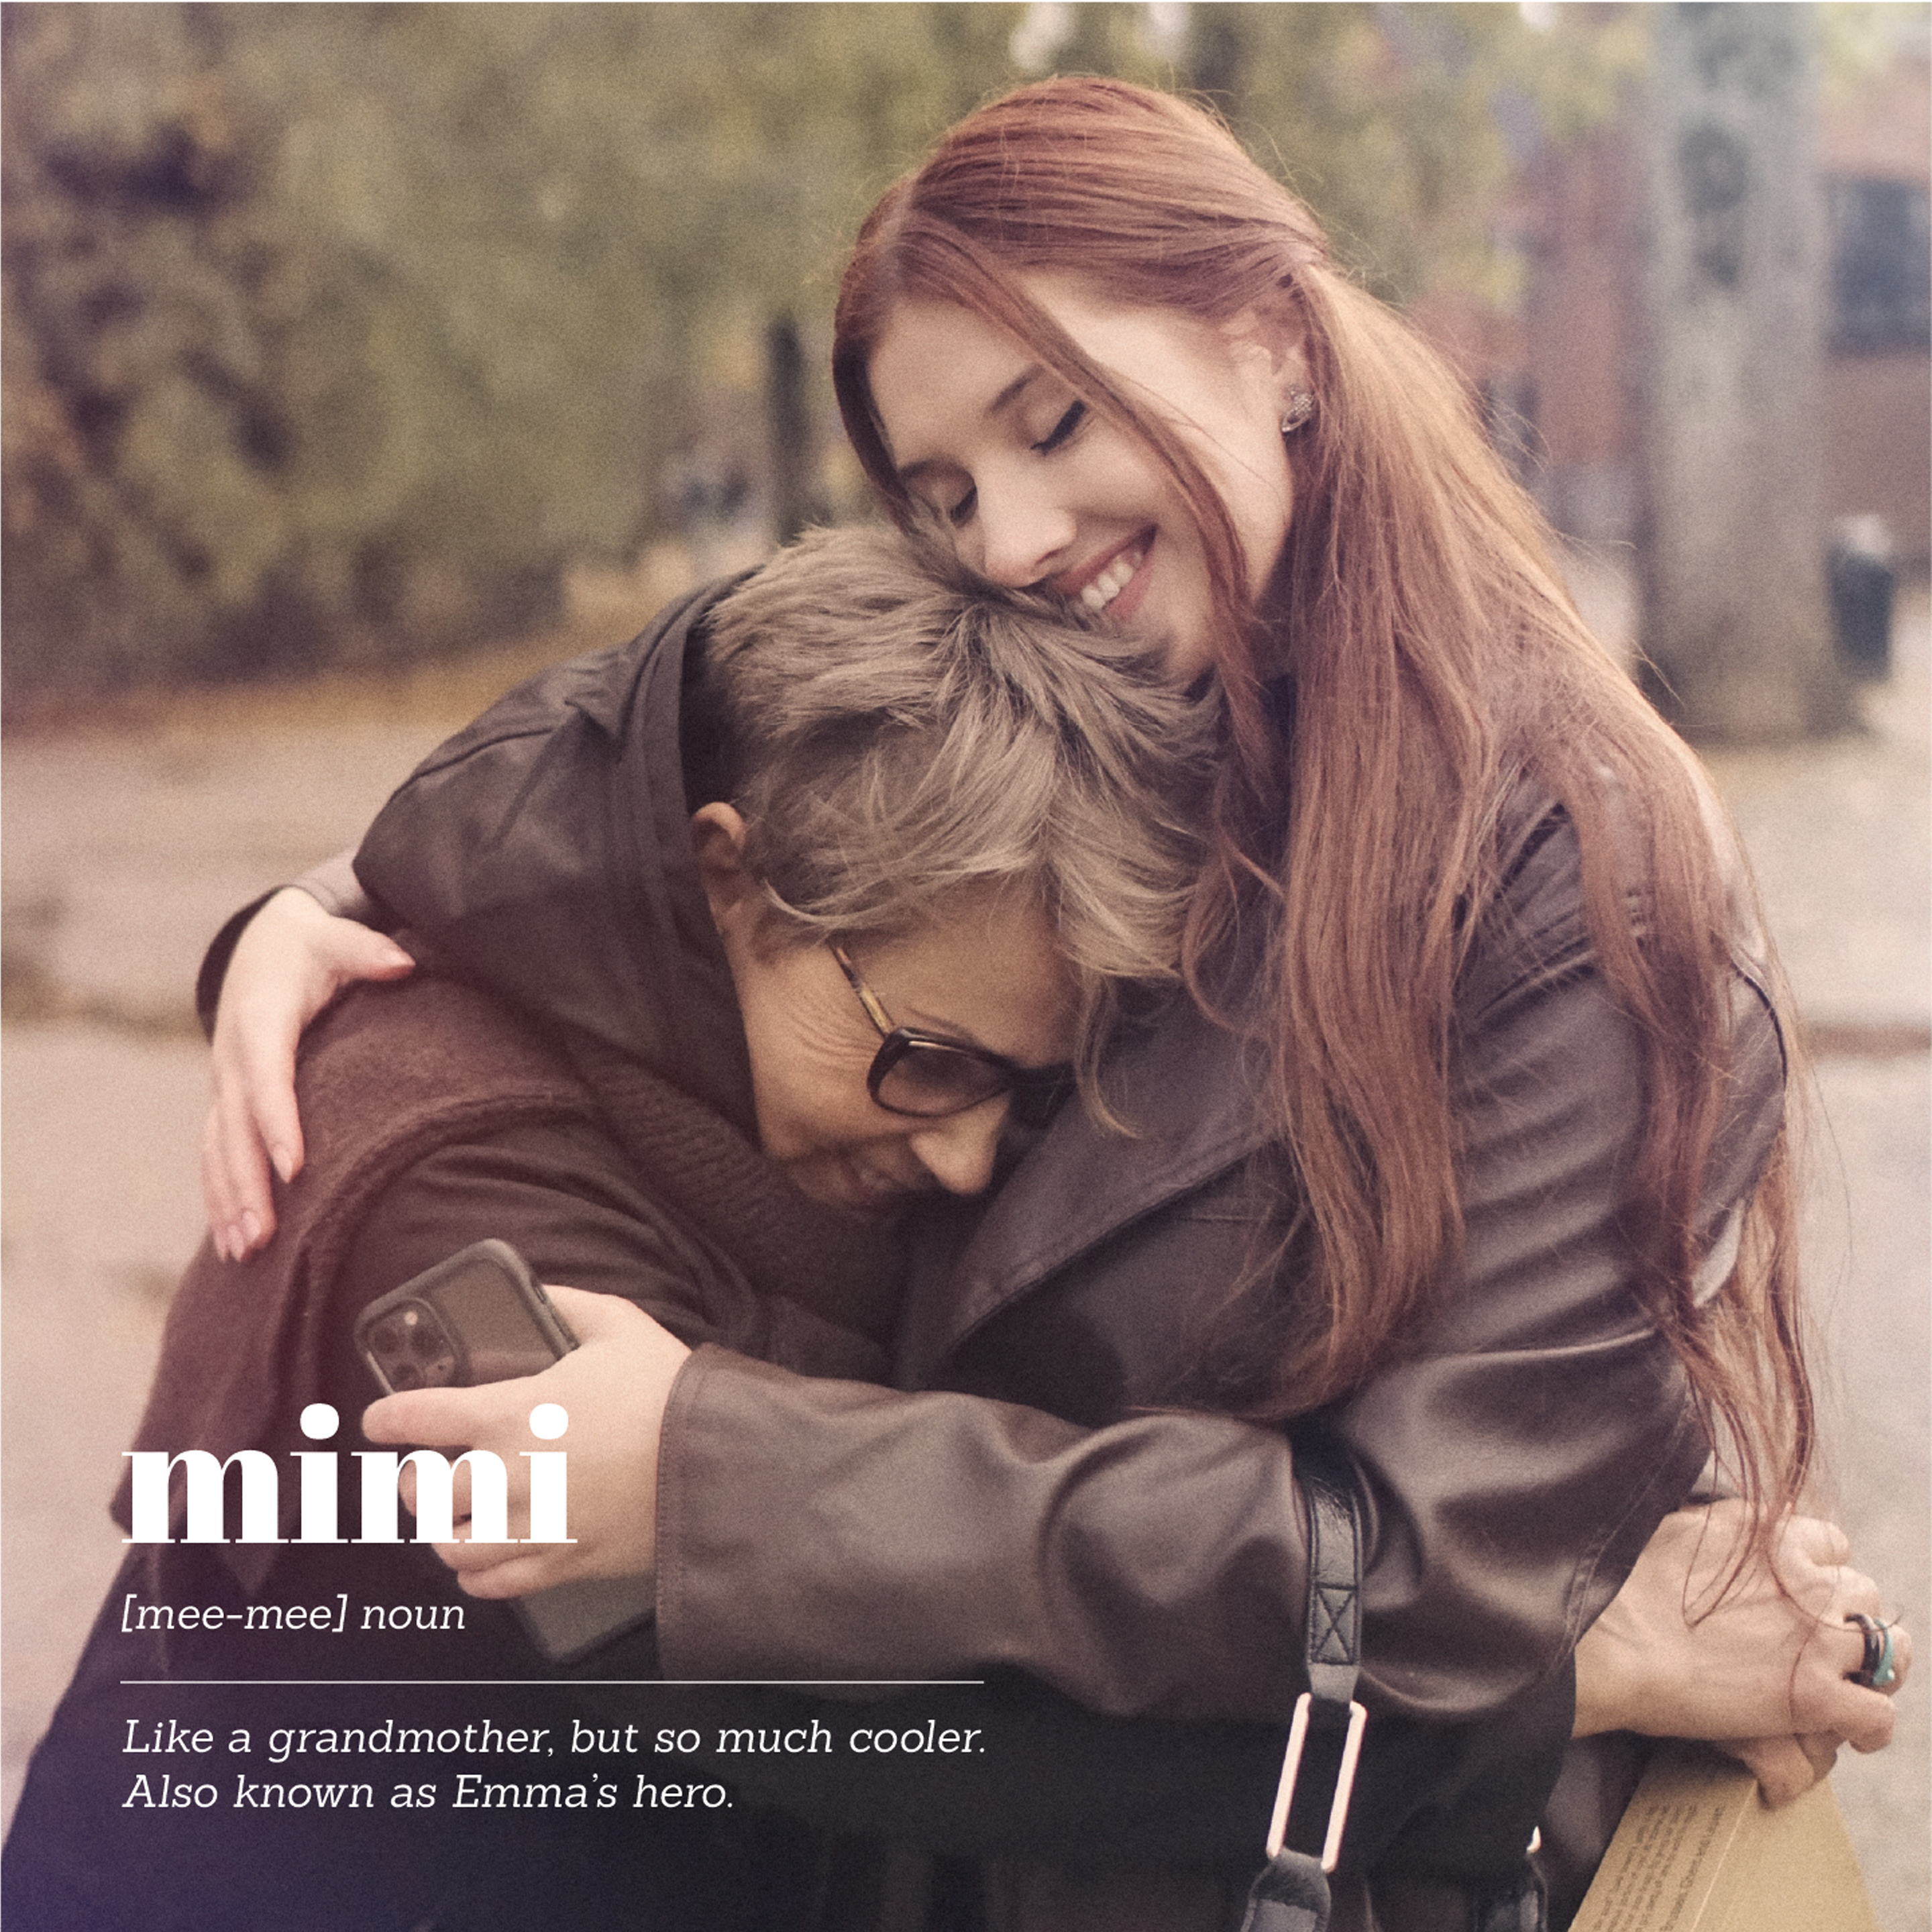 mimi-meaning-design-theme.png